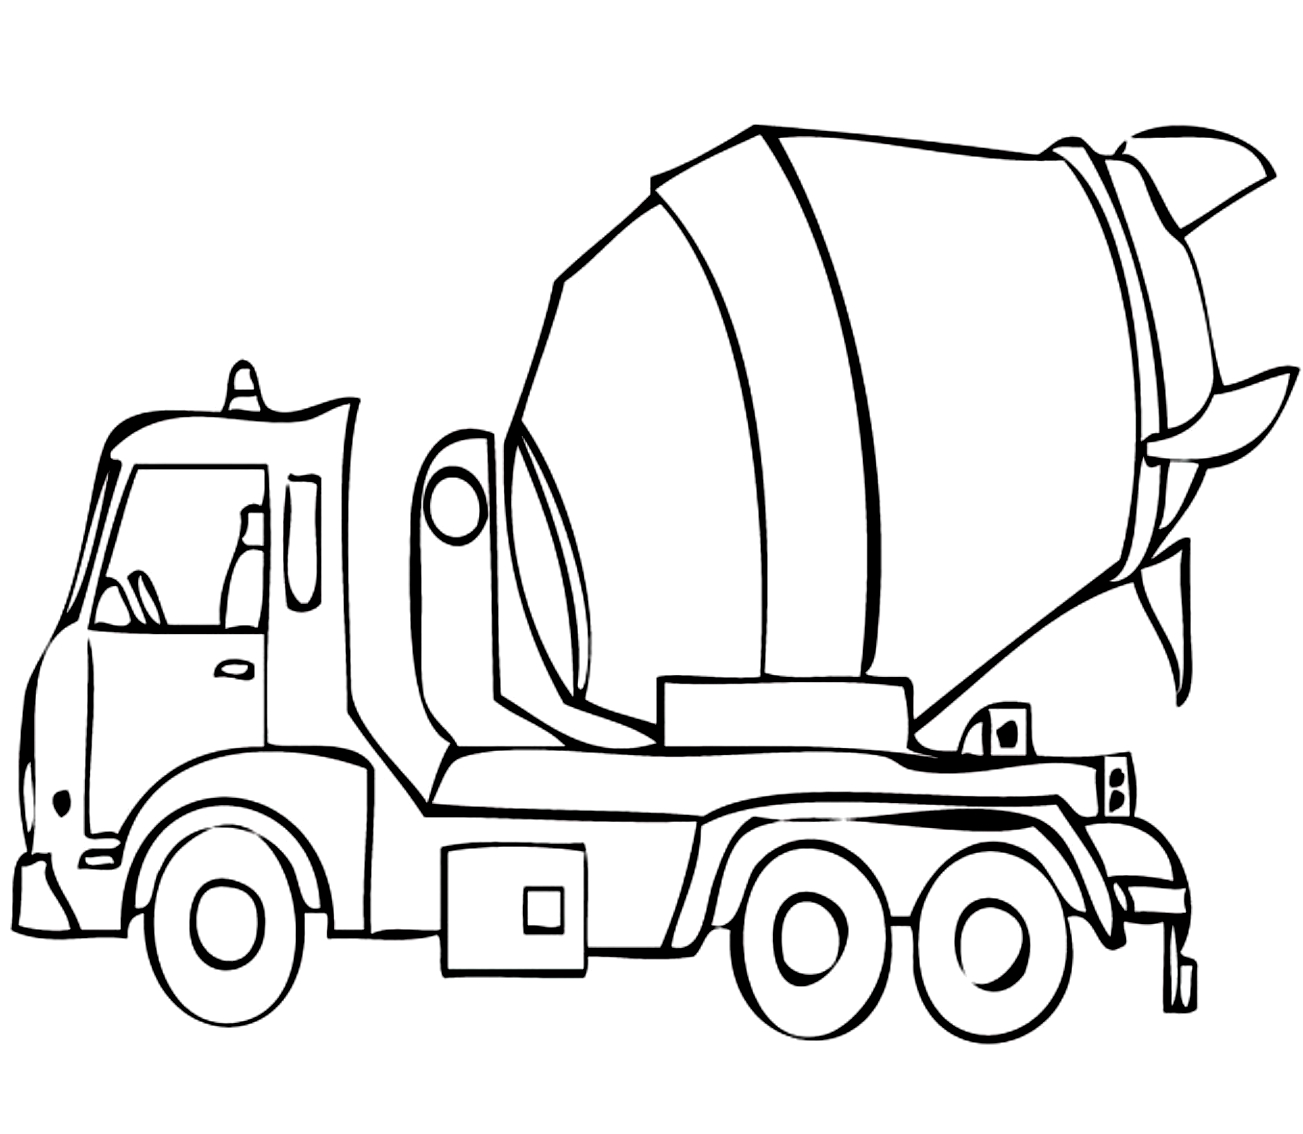 Drawing 1 from Truck coloring page to print and coloring